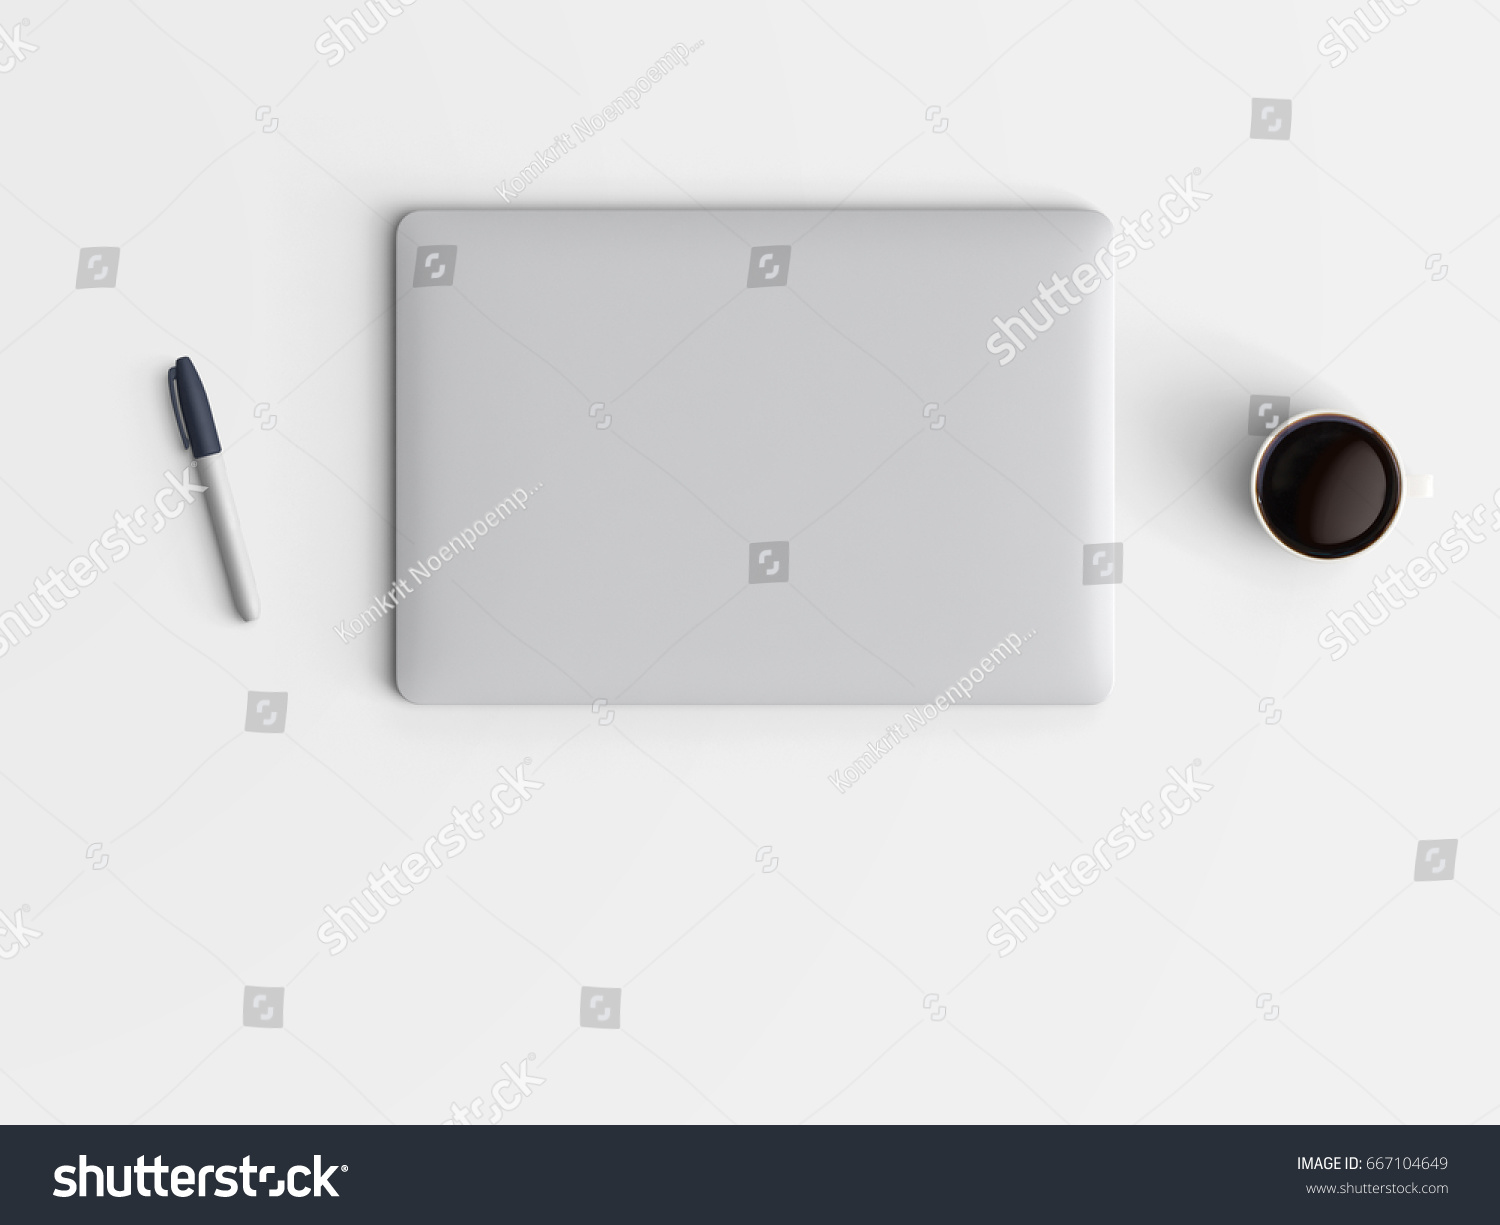 Modern office desk workplace with closed laptop, coffee cup and pen copy space on color background. Top view. Flat lay style. #667104649